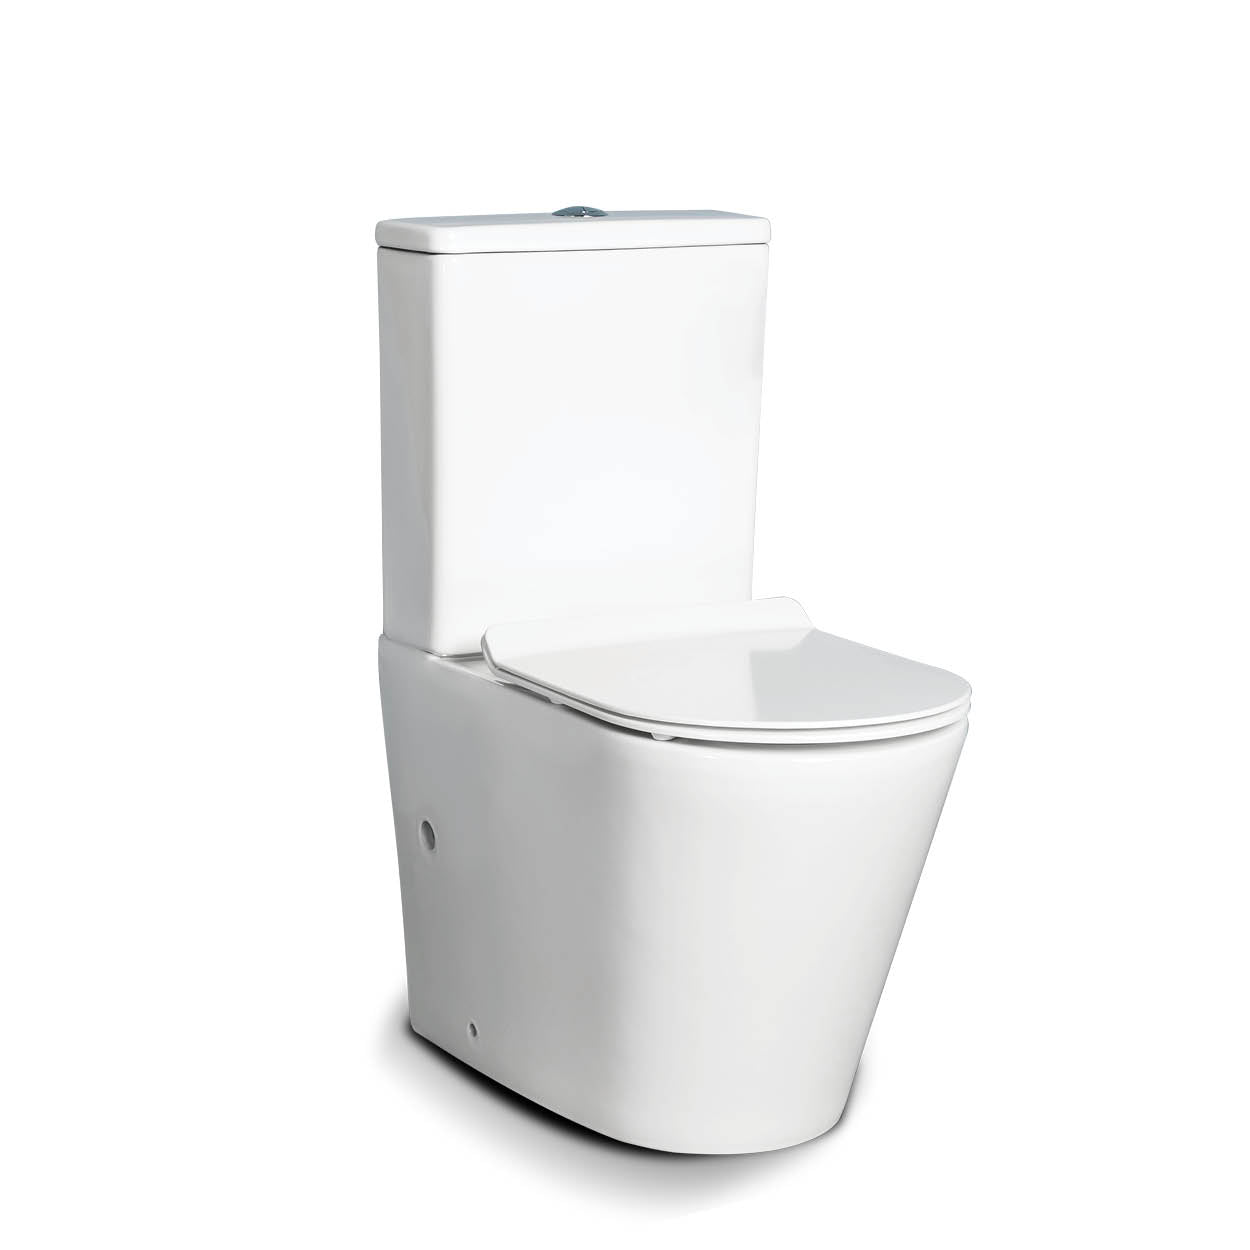 The Eyre Rimless Wall-Faced Two-Piece Toilet